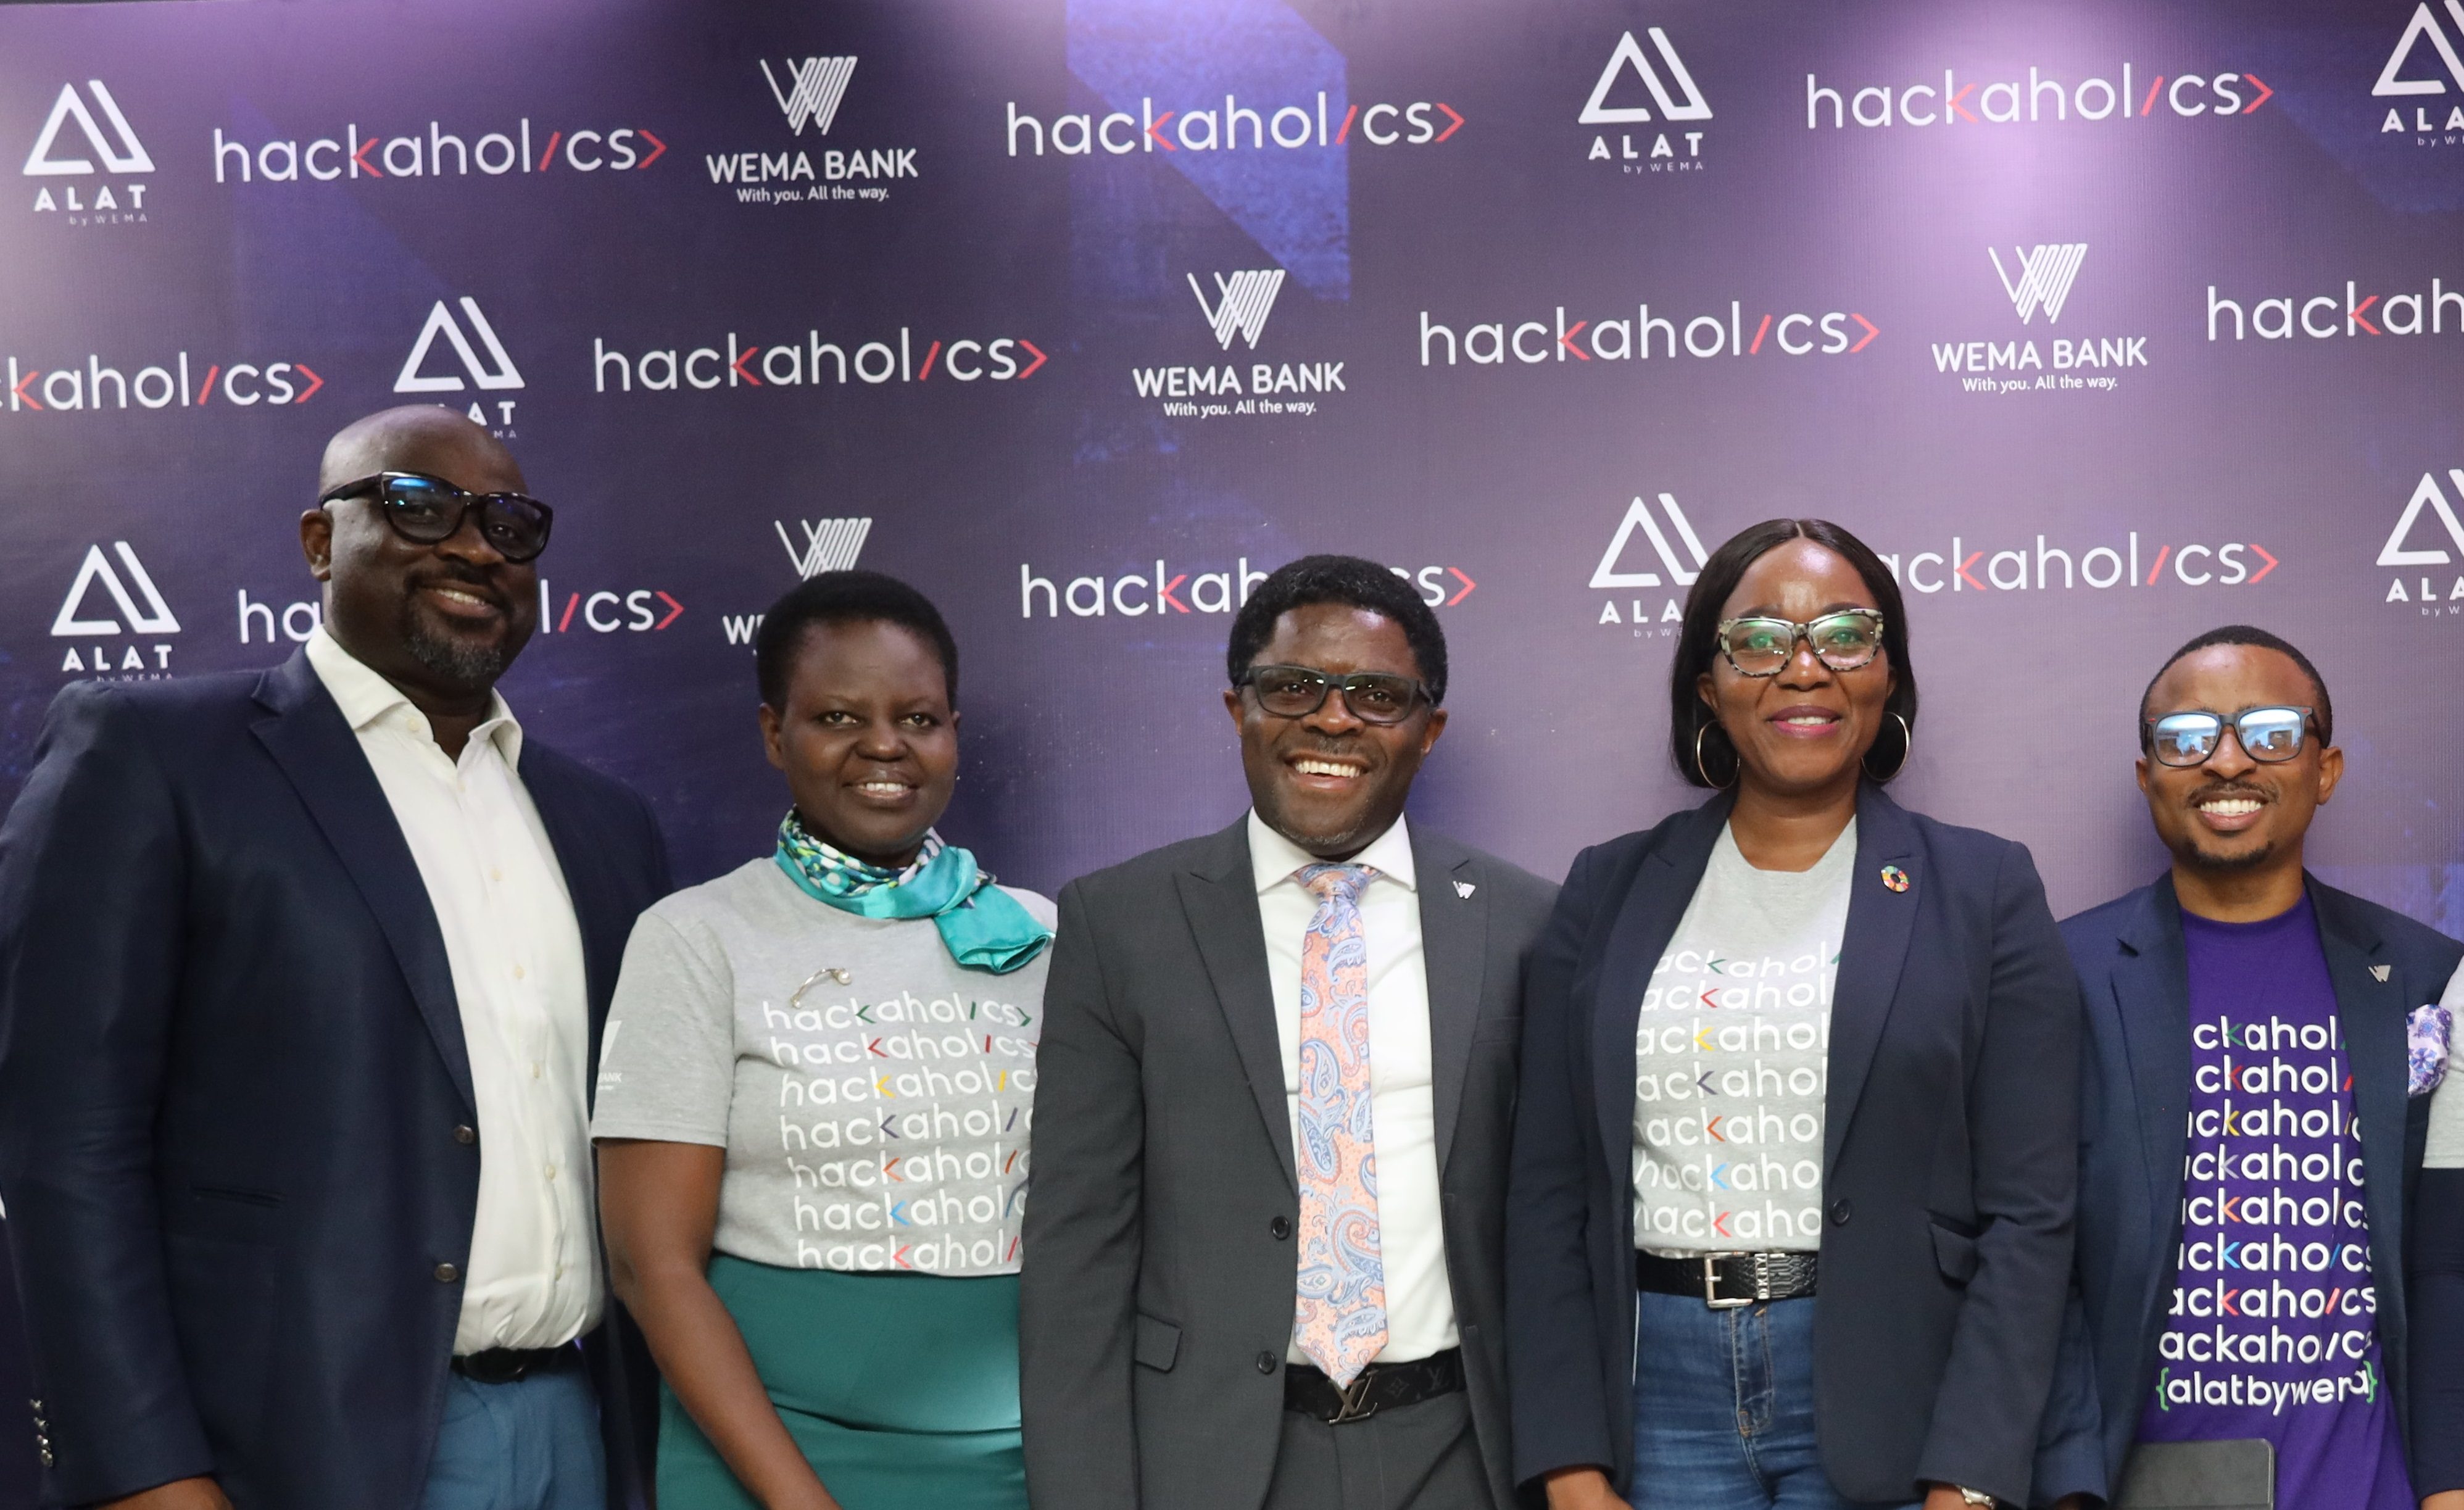 From left to right, Chief Digital Officer, Wema Bank, Olusegun Adeniyi; Divisional Head, Brand People, and Culture, Wema Bank, Ololade Ogungbenro; Executive Director, Digital and Retail Directorate Wema Bank, Tunde Mabawonku; Head Corporate Sustainability & Responsibility, Wema Bank, Abimbola Agbejule and Head Of Innovation, Wema Bank, Solomon Ayodele; at the launch of ALAT Hackaholics 4.0 press conference held yesterday, Tuesday 14th, March, 2023 in Ilupeju, Lagos.